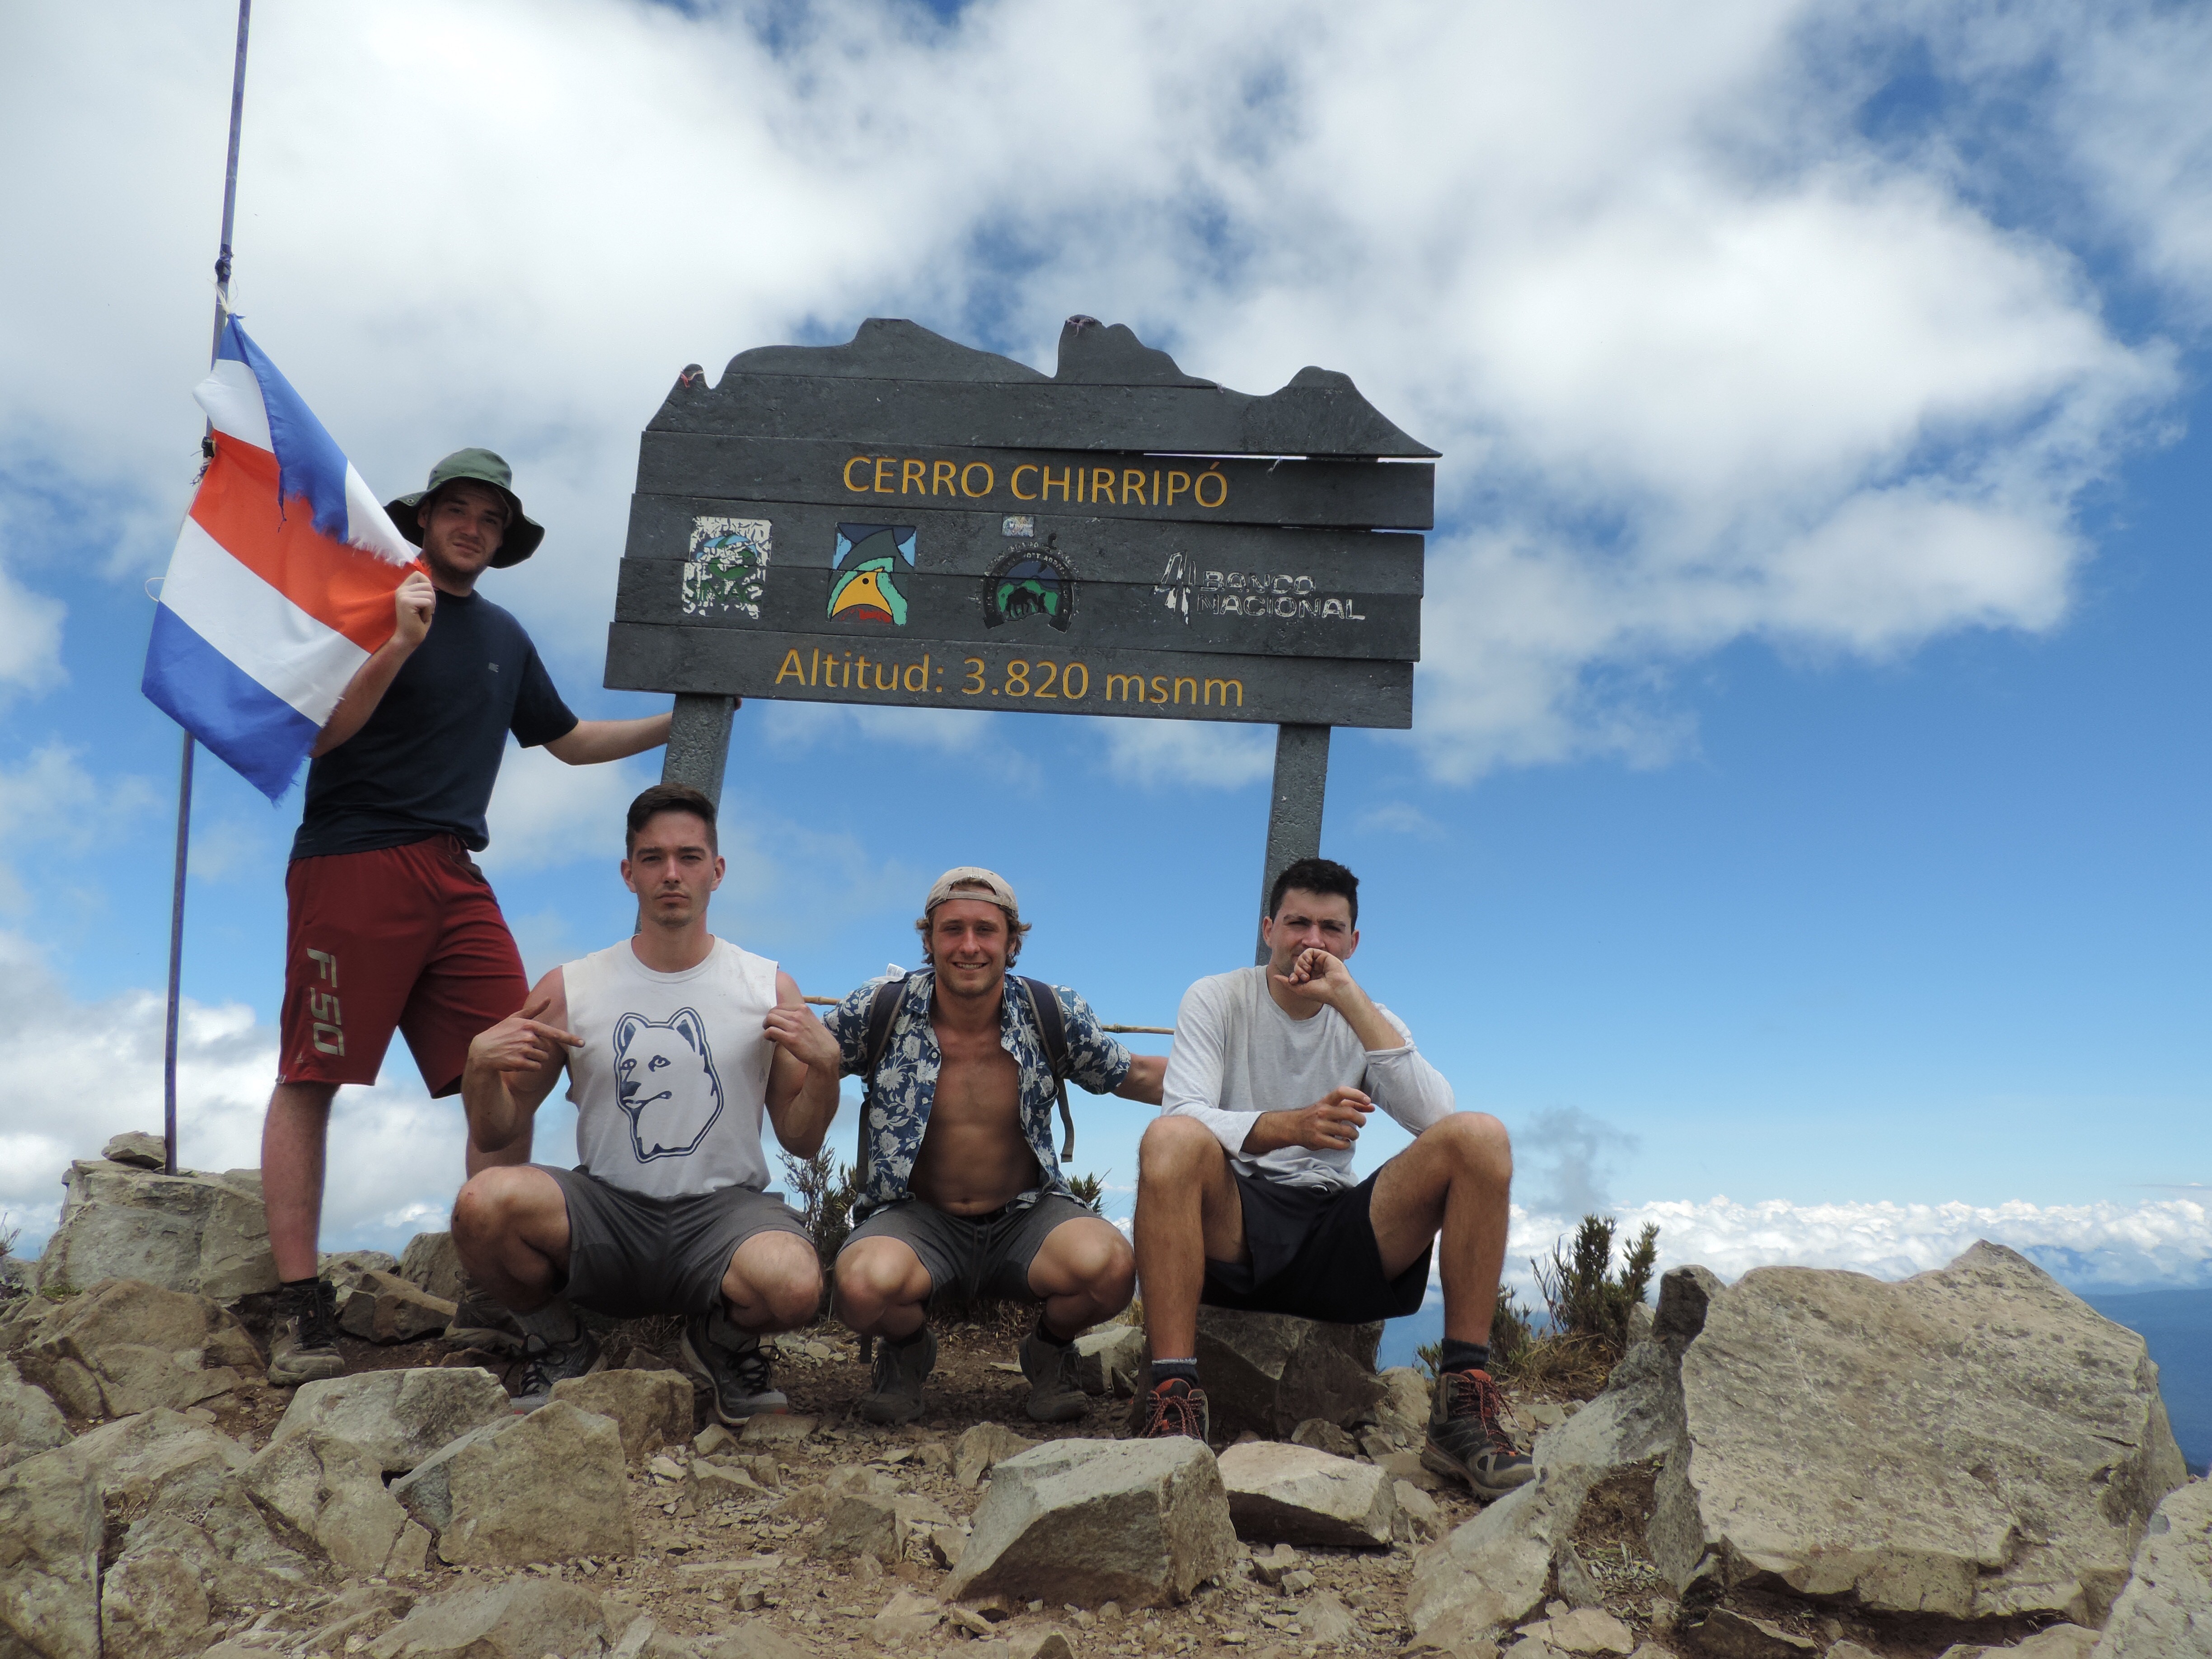 Stephen Schmidt, Garrett Yantosh, Mathew Pias and Conor Champagne, all Class of 2017, climbed to the summit of the tallest mountain in Costa Rica, Cerro Chirripo: 12,532 feet.